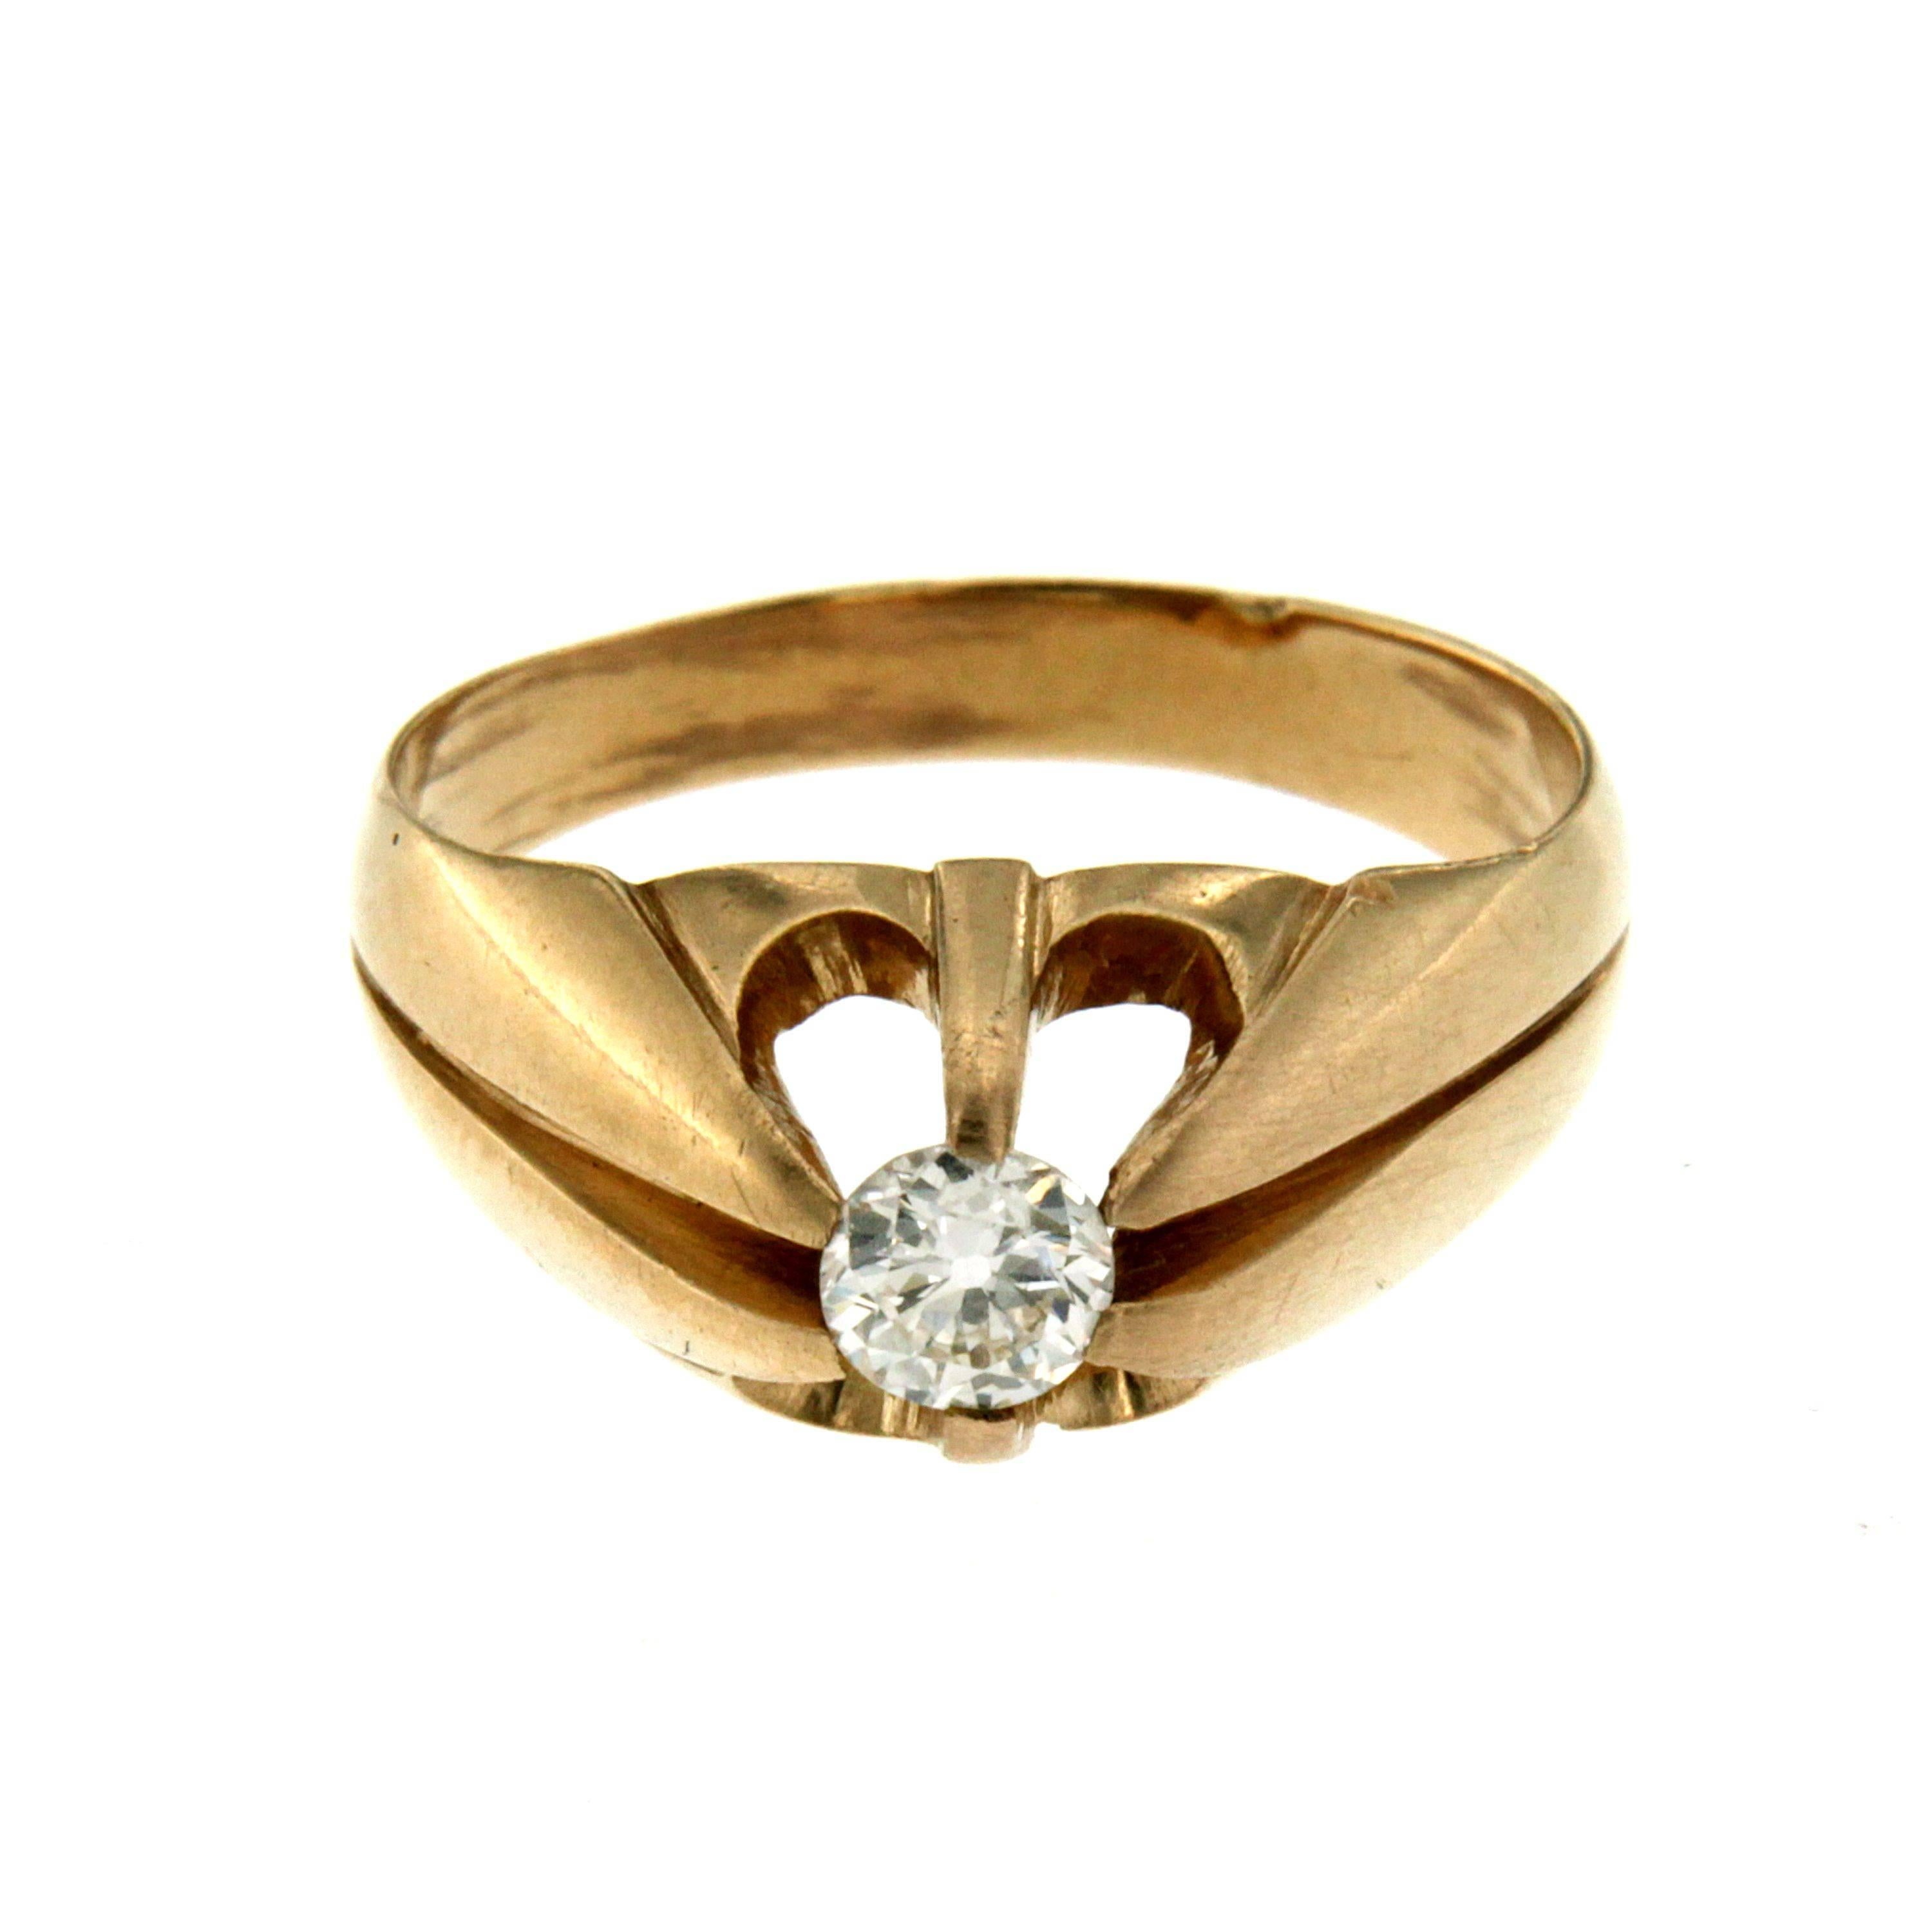 A gorgeous Retro solitaire ring modelled in 18k yellow Gold and set with a 0.30ct round cut diamond. Six very fine claws hold the stone in an open gallery. Circa 1940

CONDITION: Pre-Owned -  Good
METAL: 18k Yellow Gold
GEM STONE: Diamond 0.30